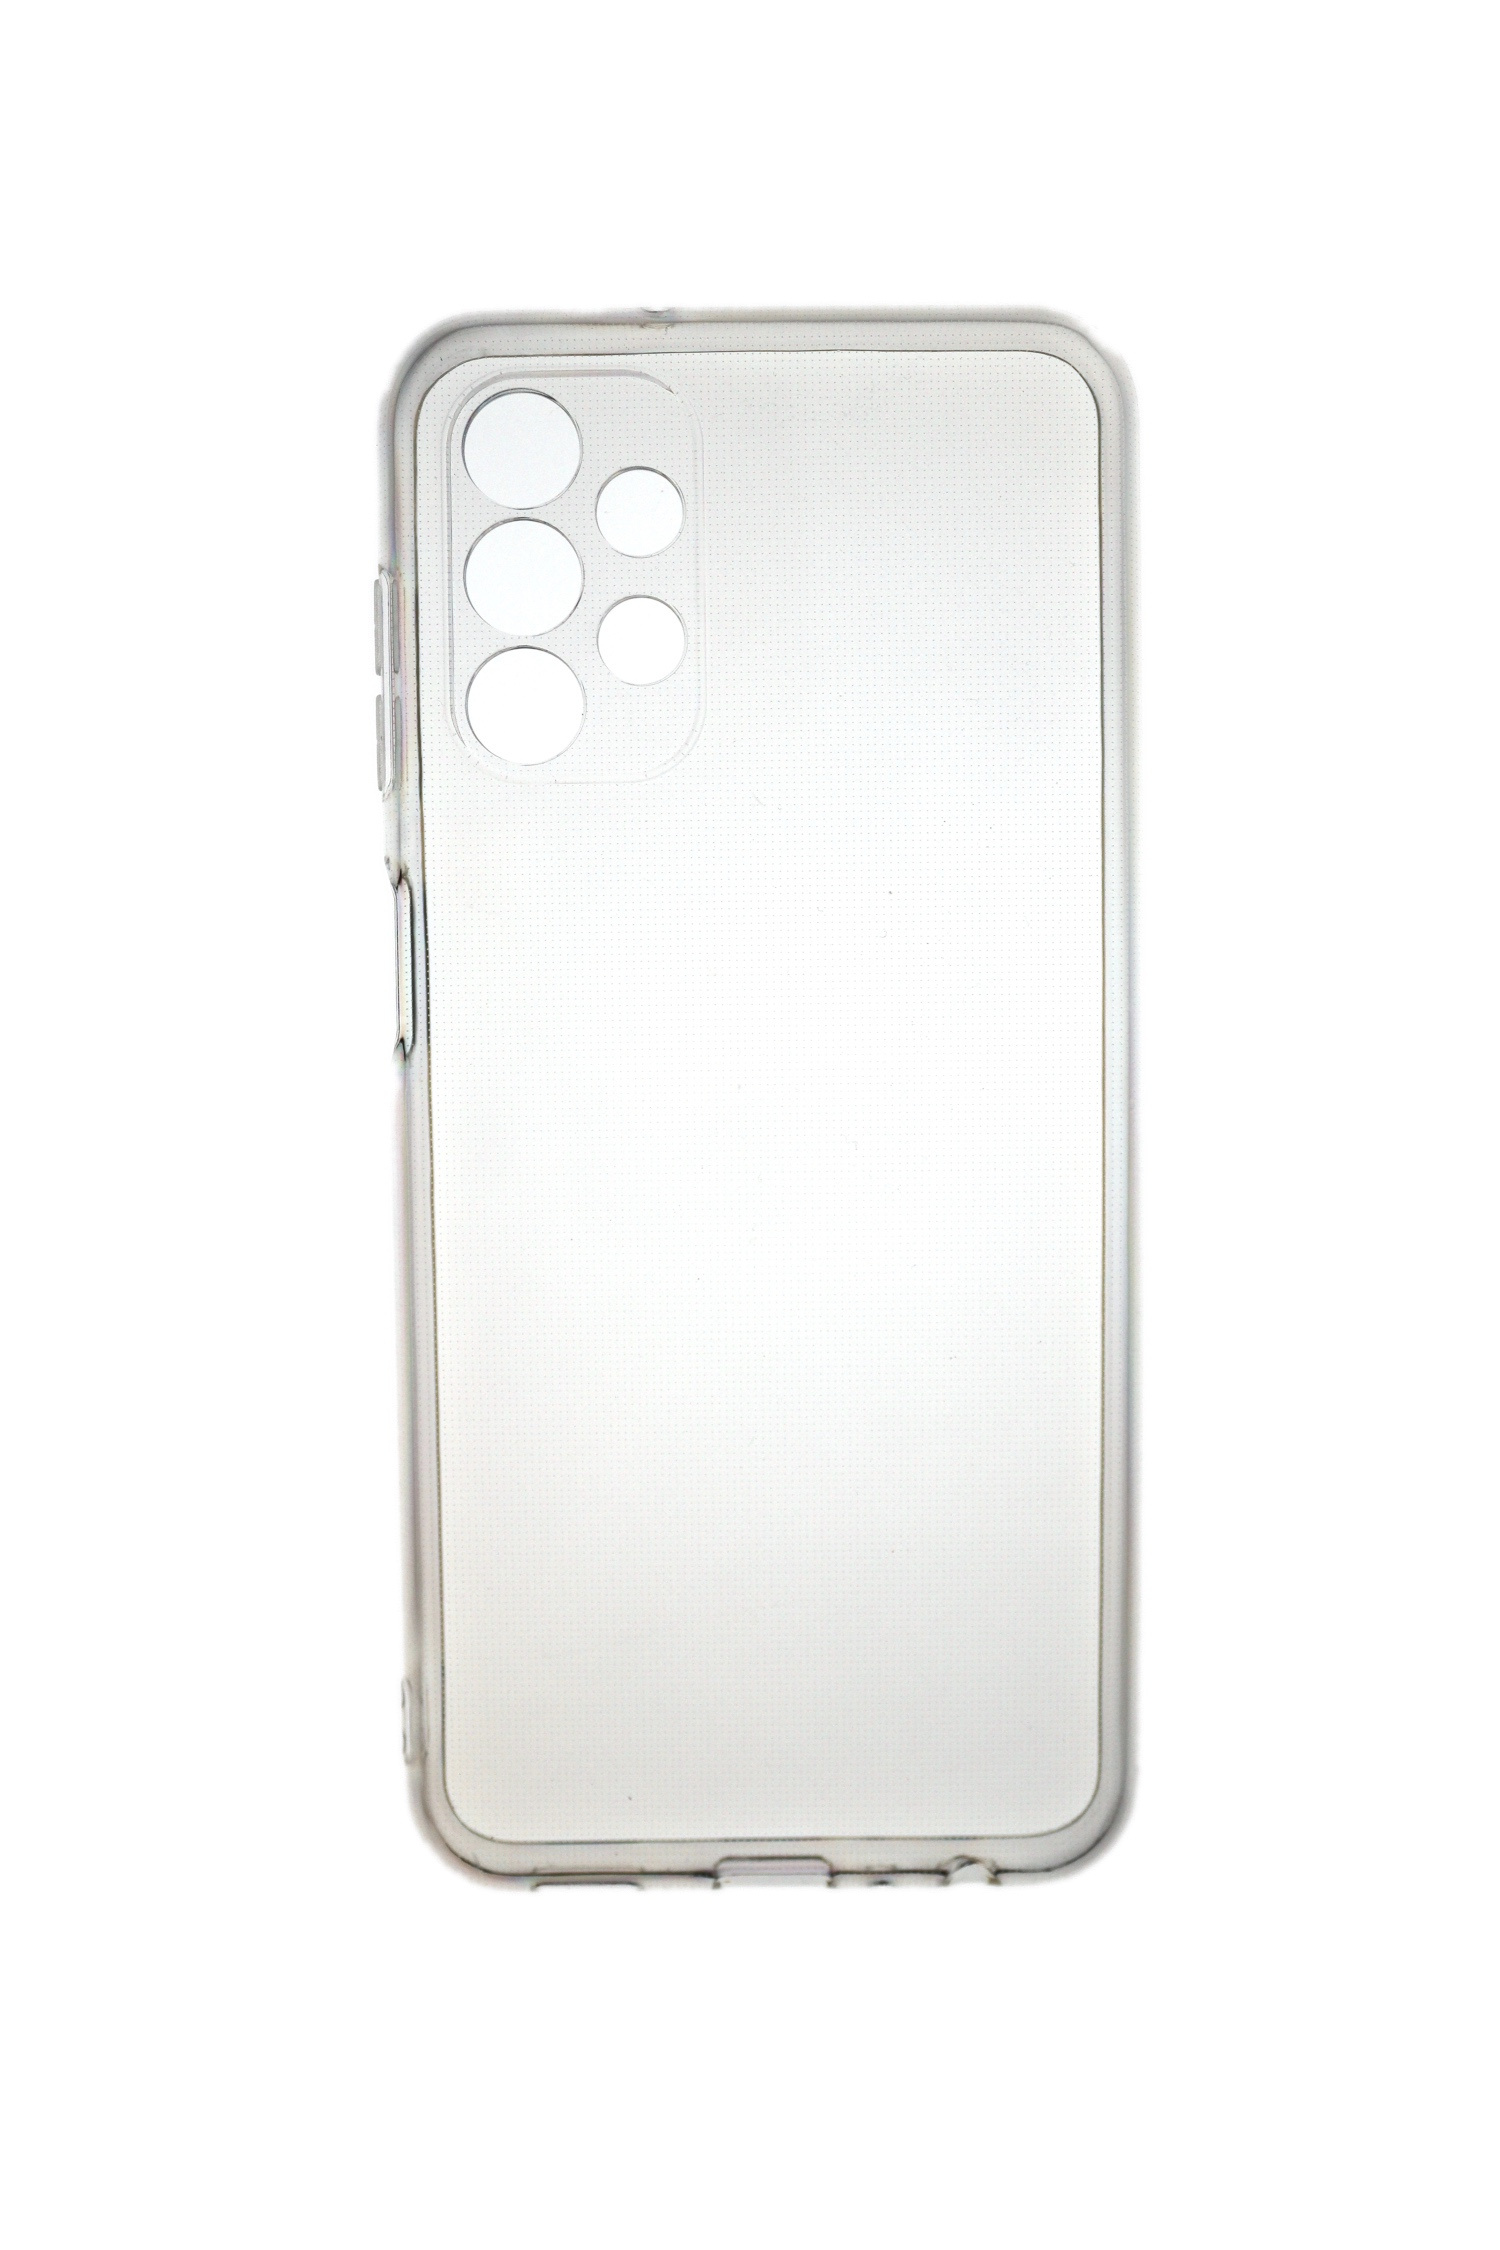 2.0 Samsung, A23 JAMCOVER Transparent mm 5G, TPU Case Backcover, Strong, Galaxy